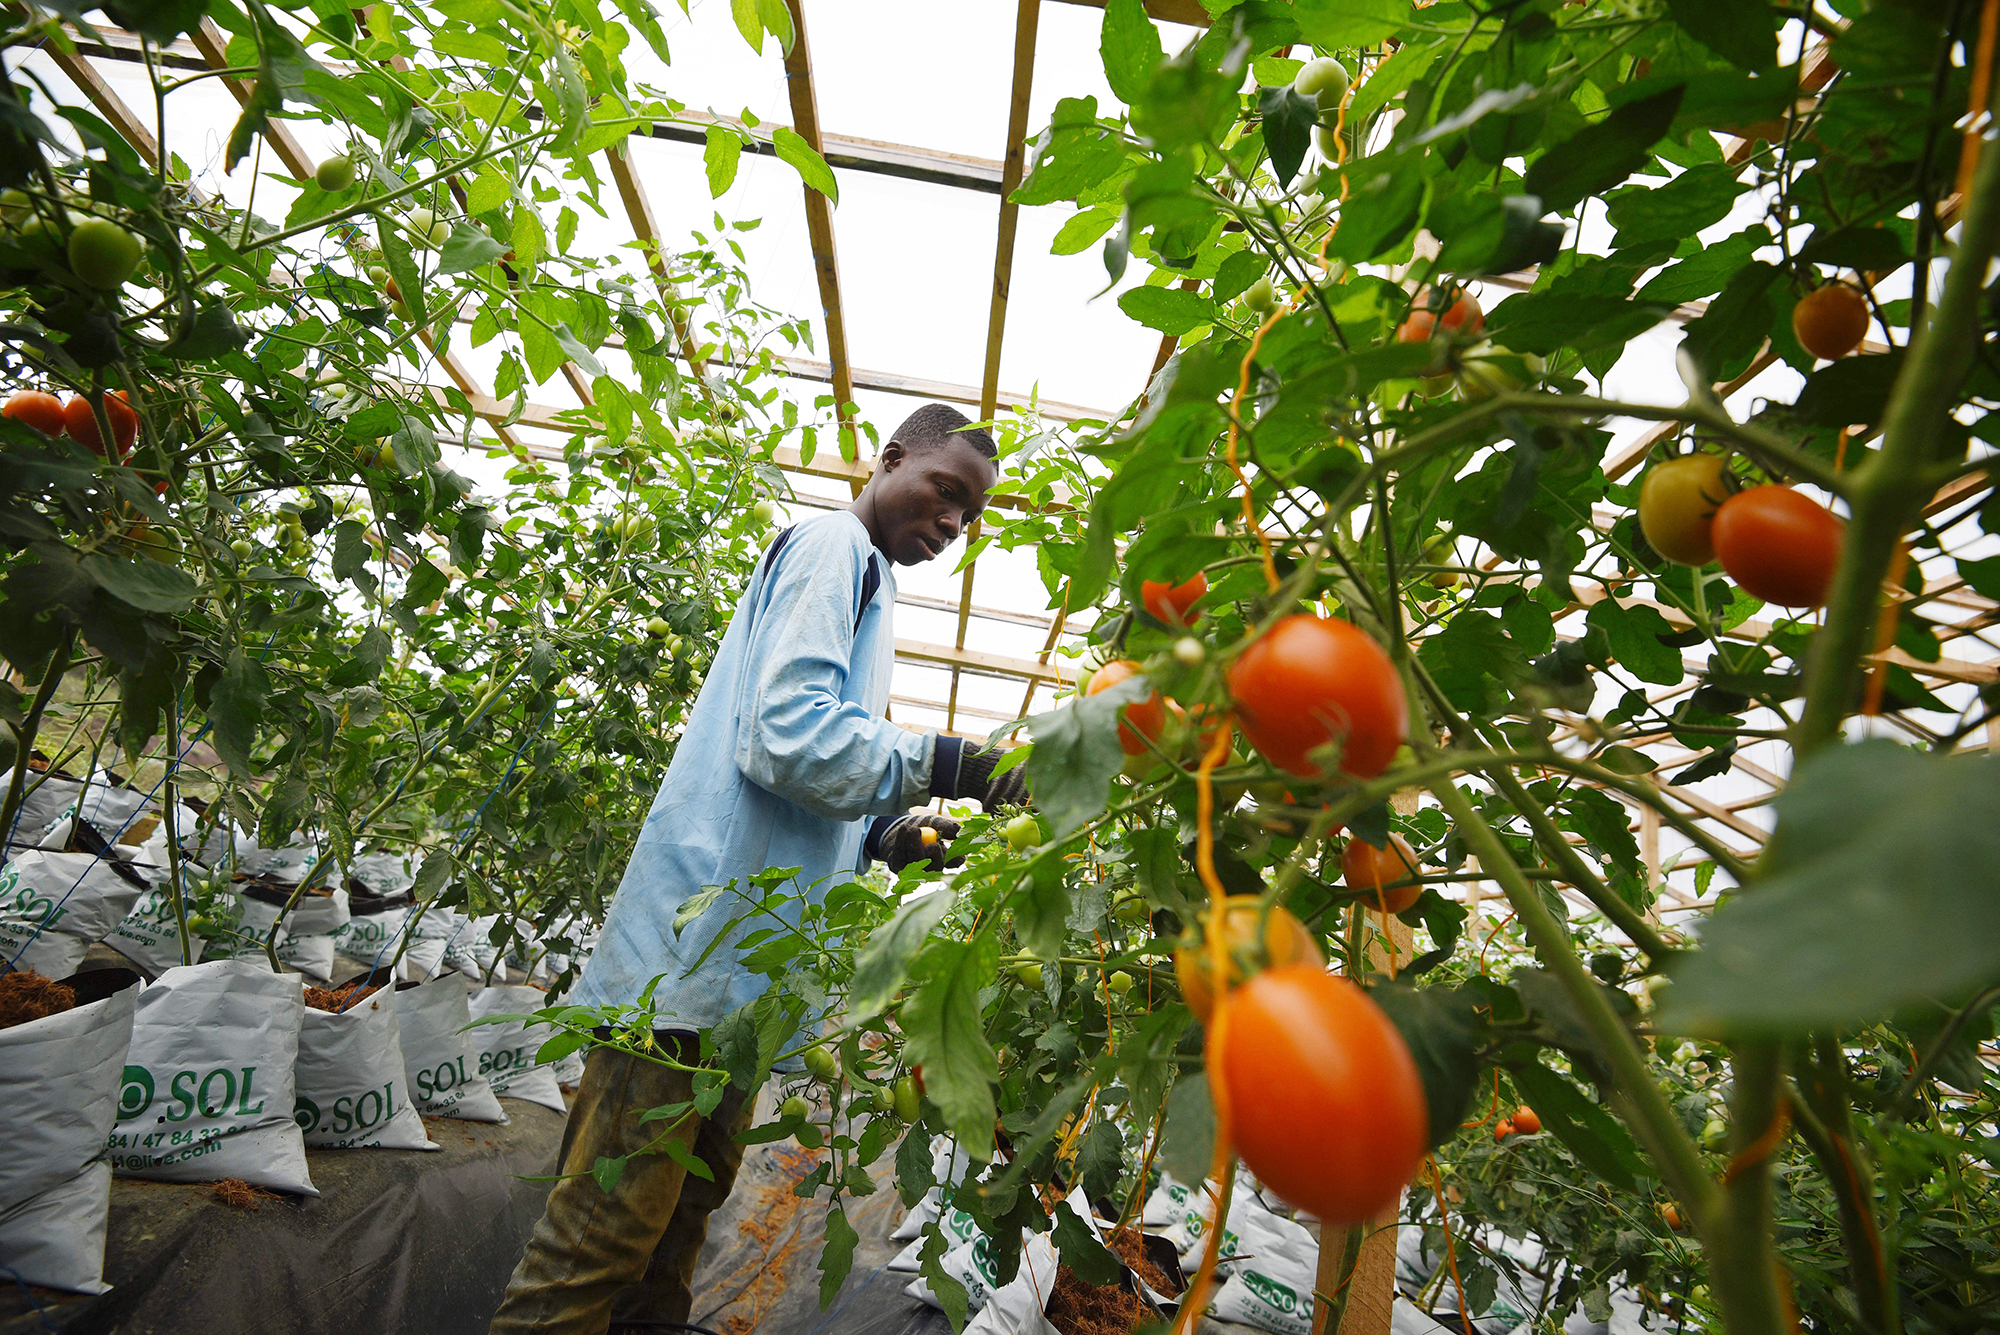 A man works in a hydroponic tomato farm in Bingerville, Côte d'Ivoire. According to a new report, governments should help make fruits and vegetables more affordable, so people are more likely to eat them.